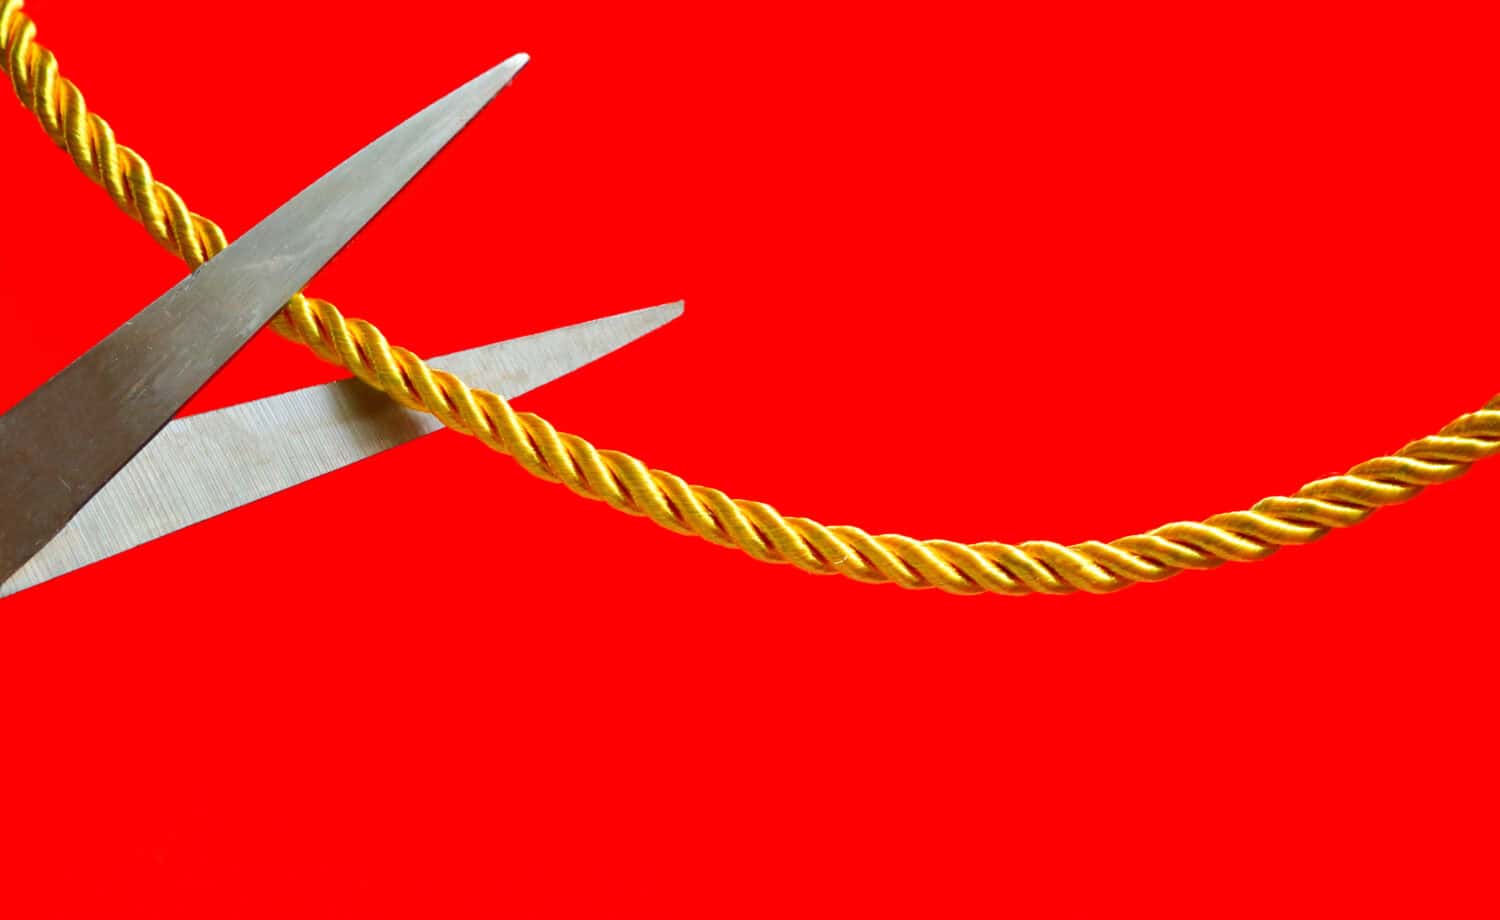 a scissors cutting a rope which tied between two sides with red background, cut relationship concept